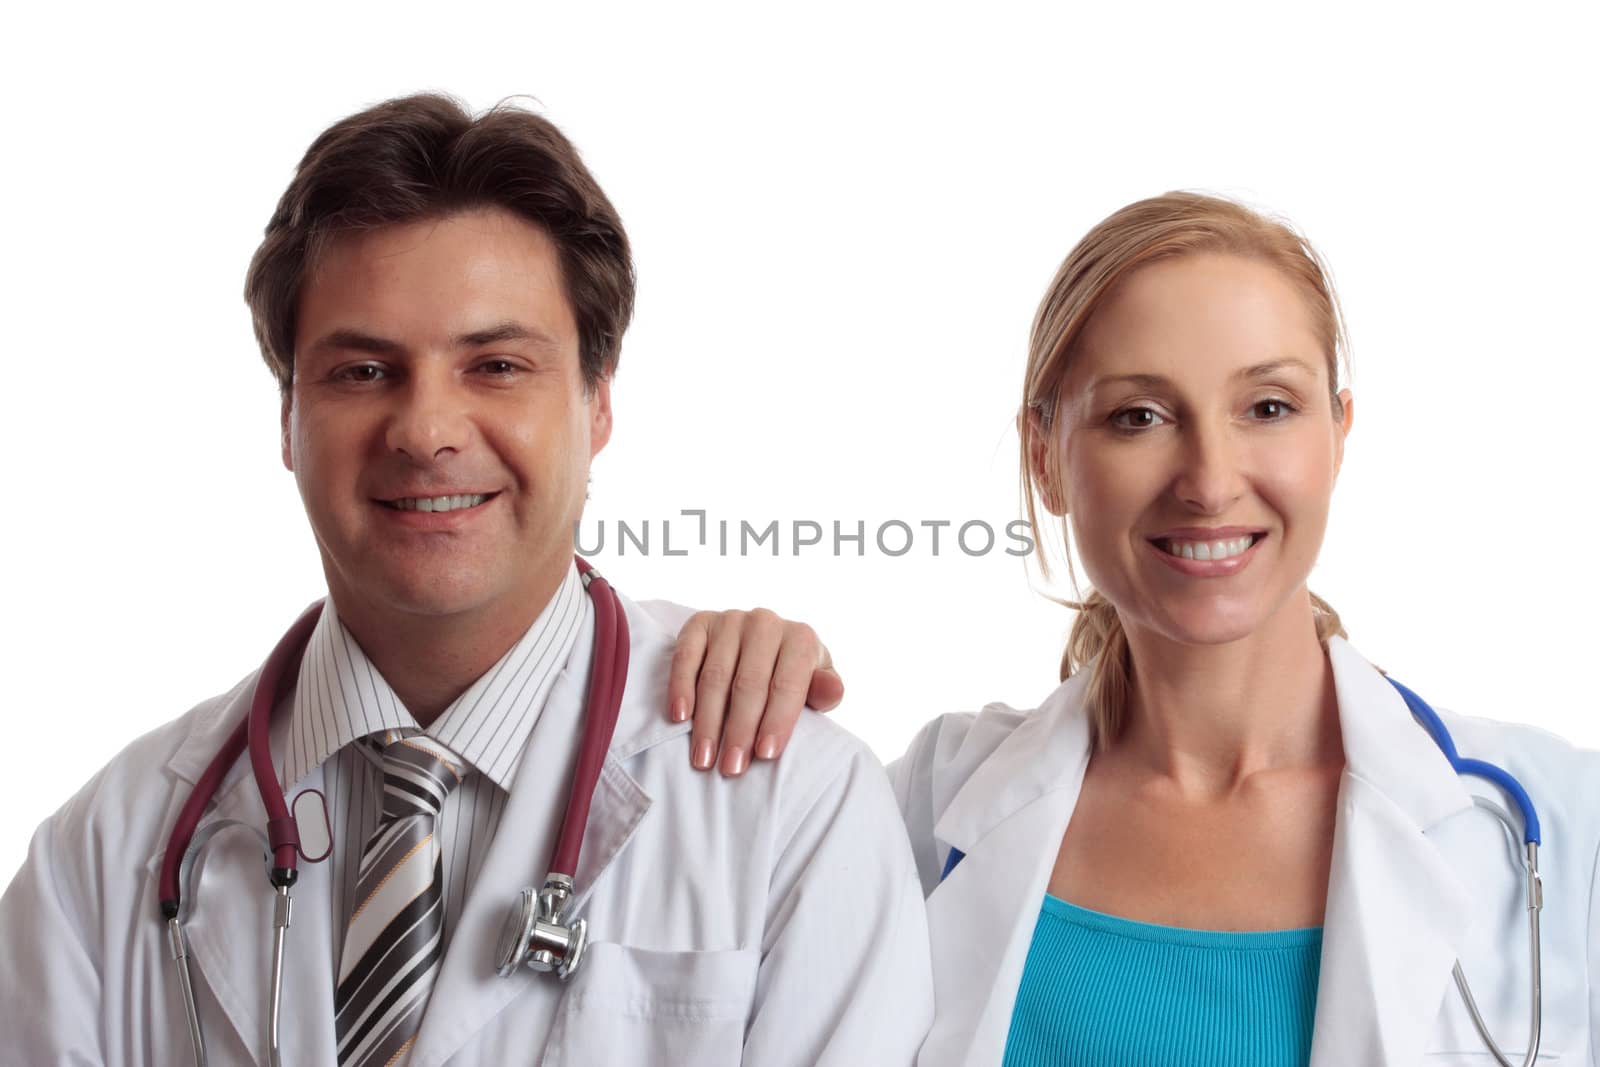 Medical healthcare professionals in uniform stand casually together with relaxed friendly smiles.